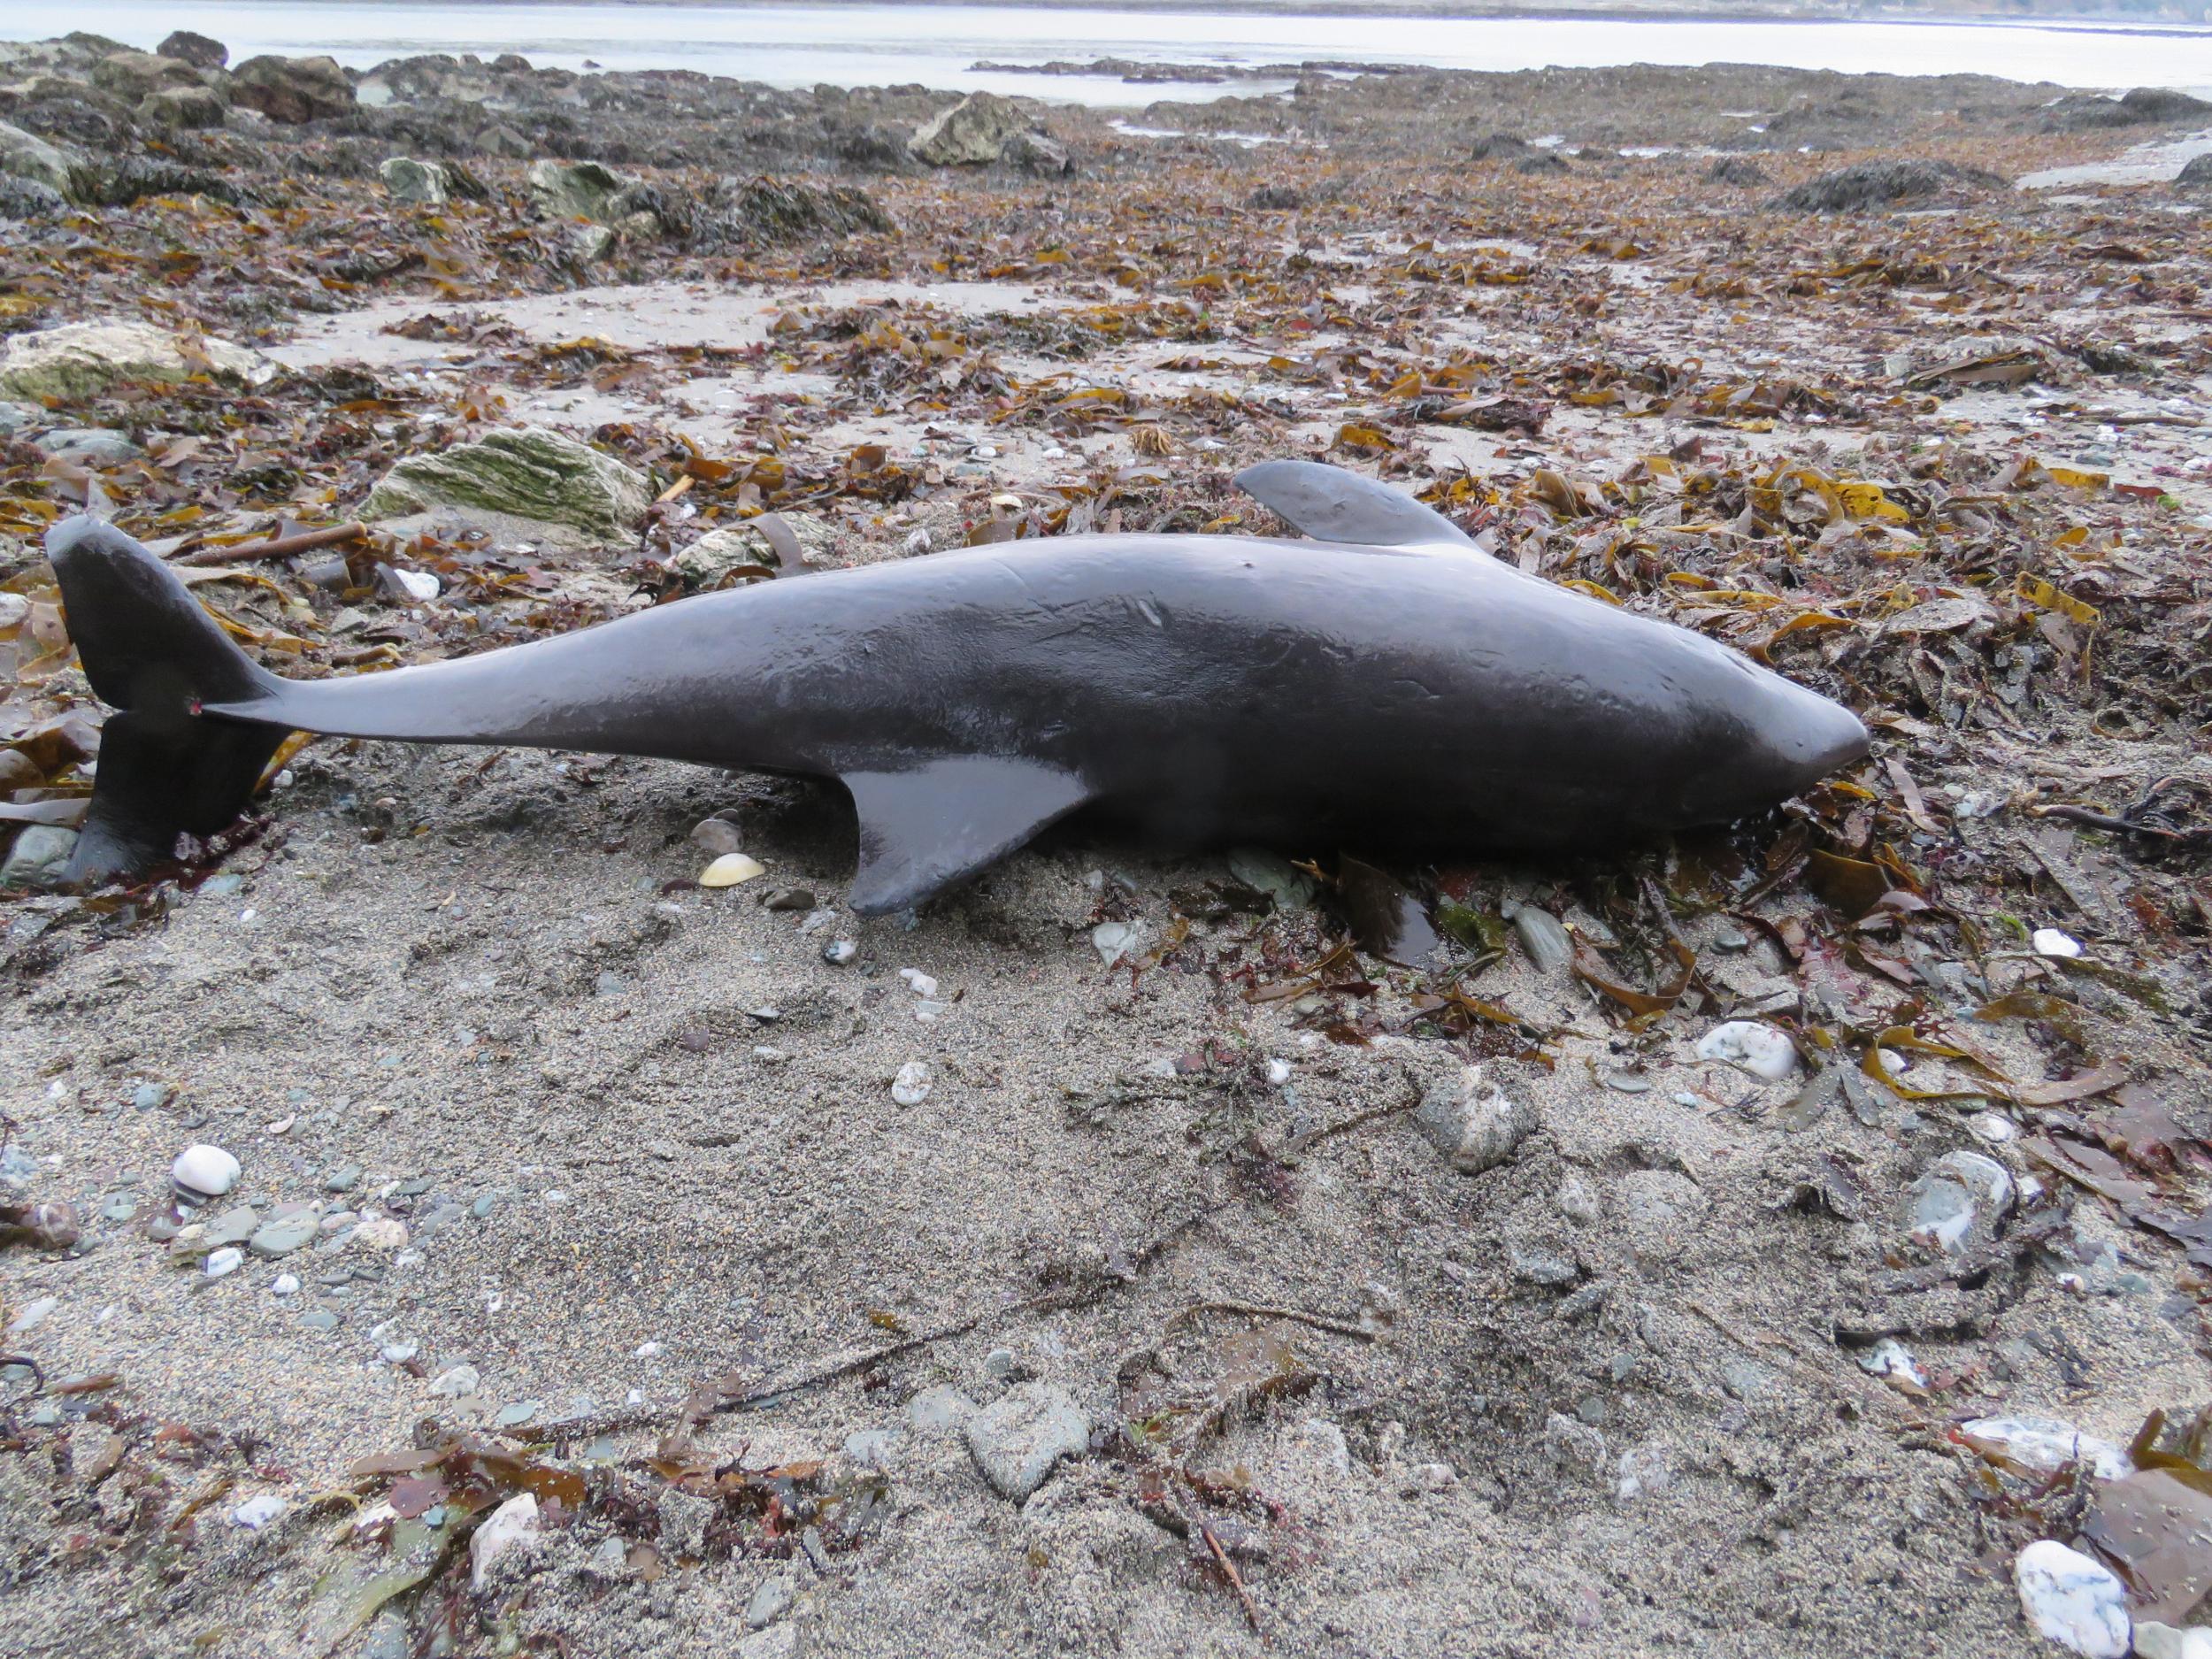 In the two-week period from the start of January, 25 dolphins were recorded on Cornish beaches by volunteers from the Cornwall Wildlife Trust, compared with just four in the first two weeks of last year